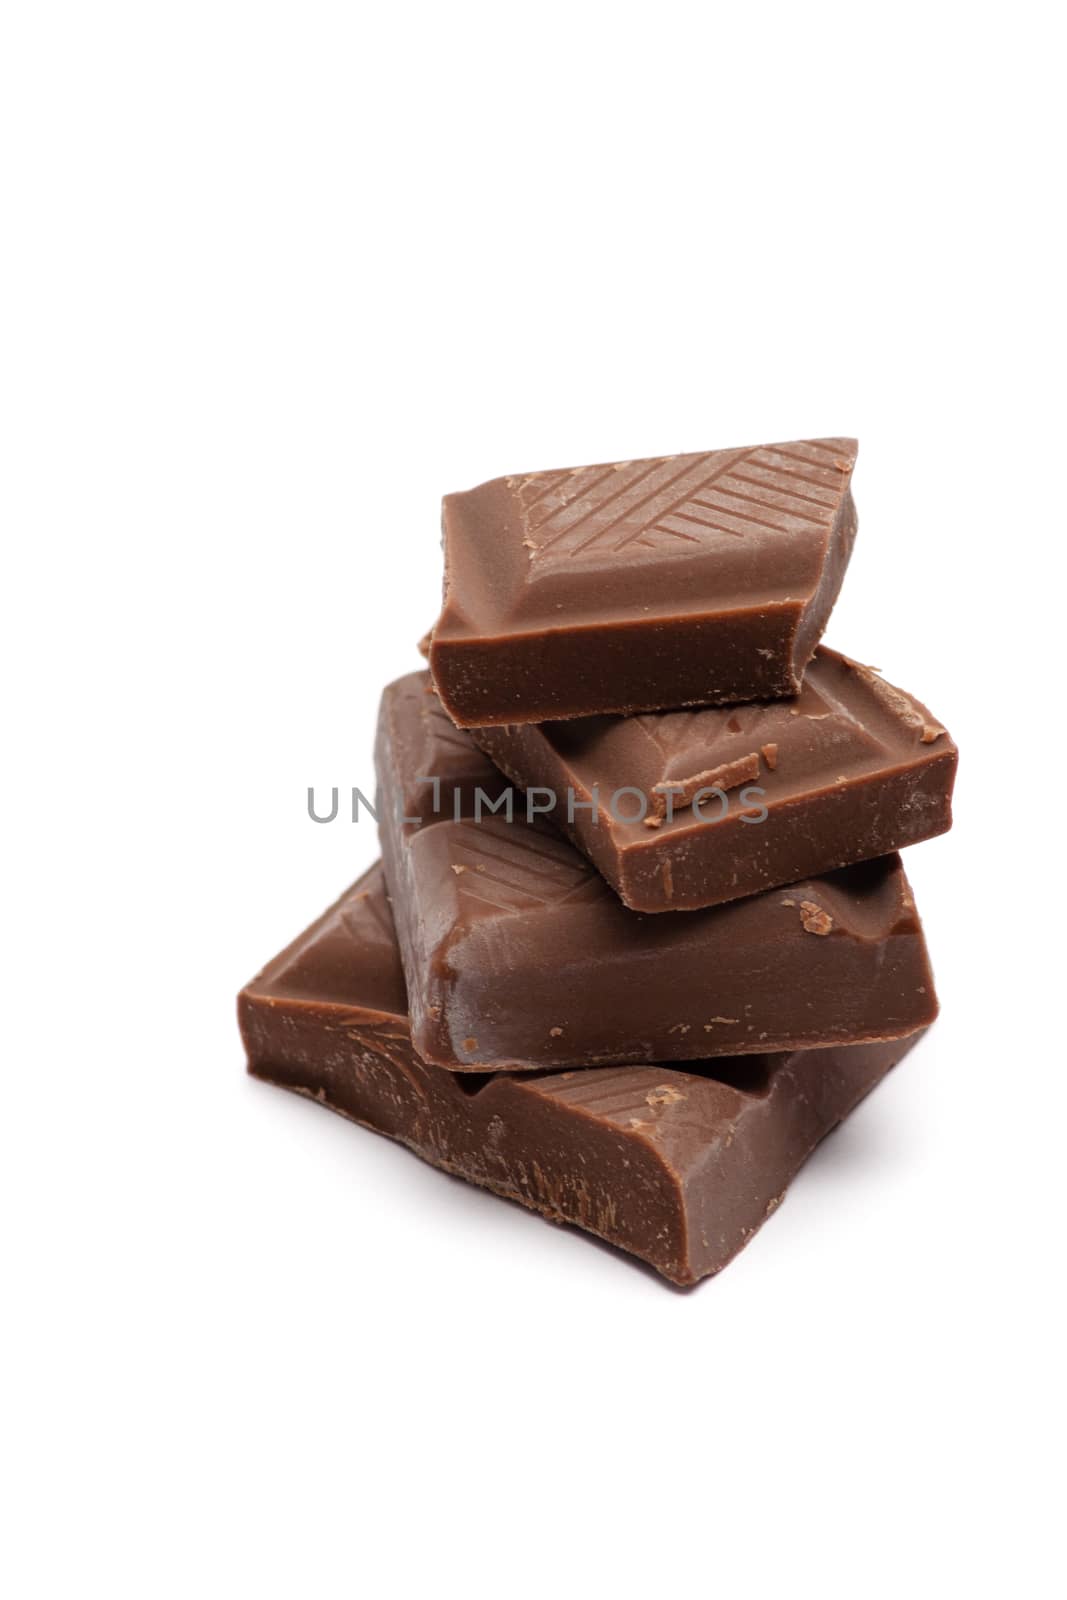 stack of dark chocolate pieces on white background